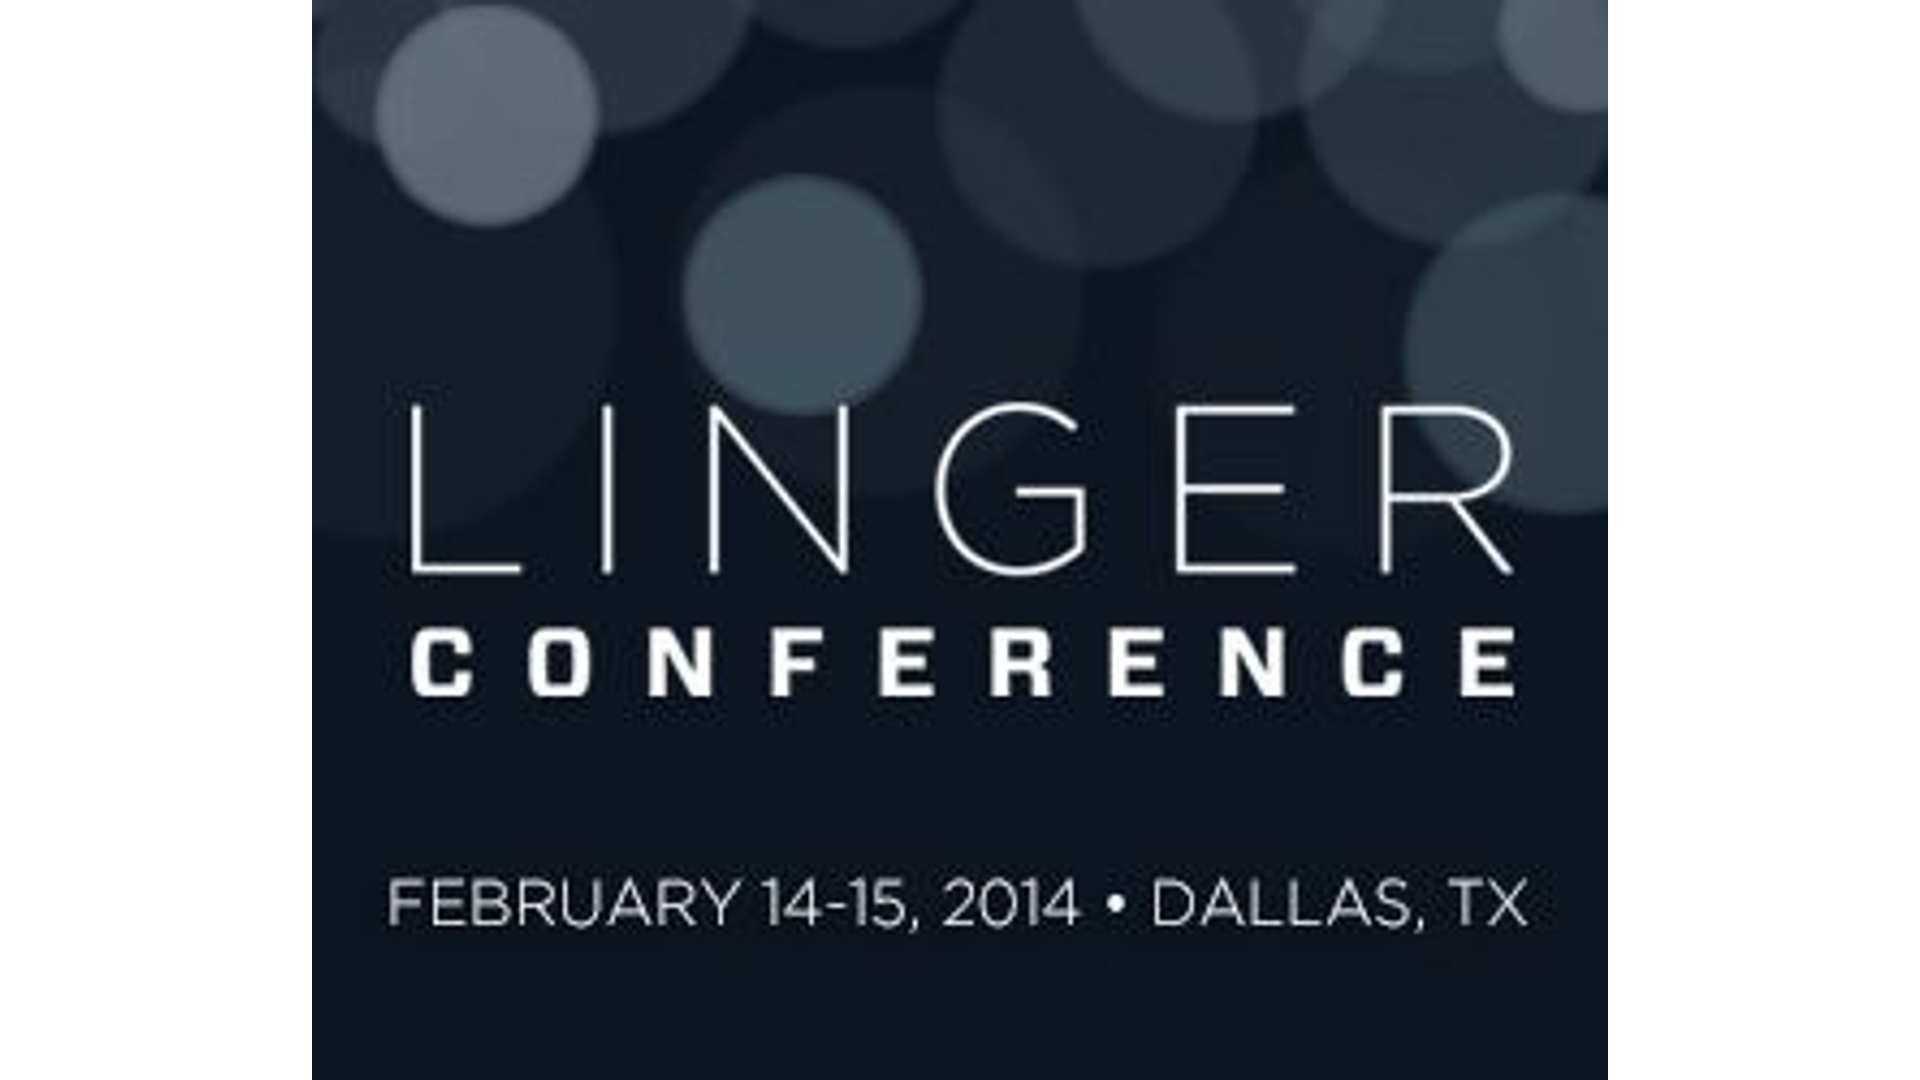 Join Todd Wagner and Friends At The 2014 Linger Conference! Hero Image